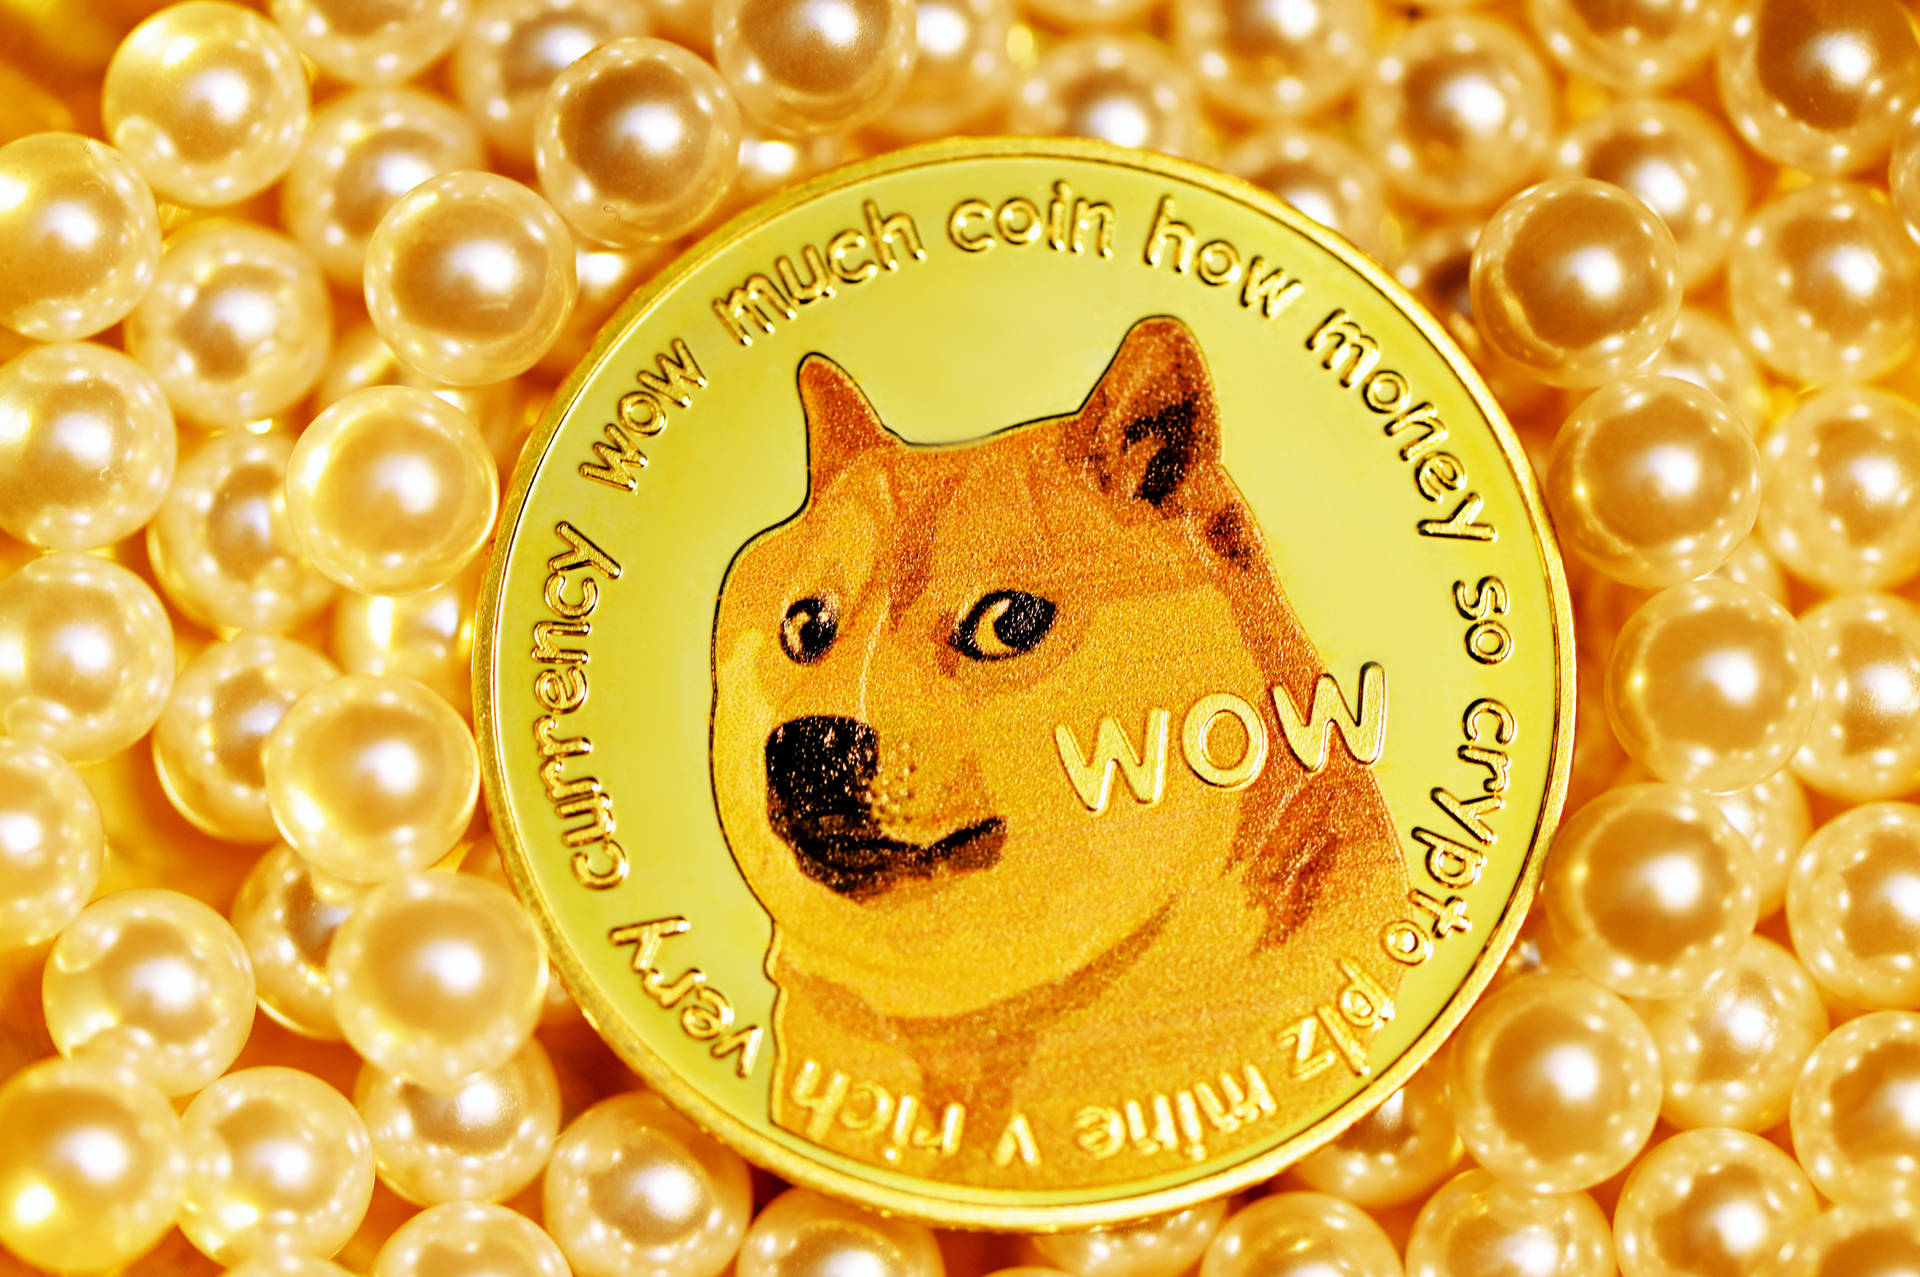 Dogecoin In Glowing Pearls Wallpaper